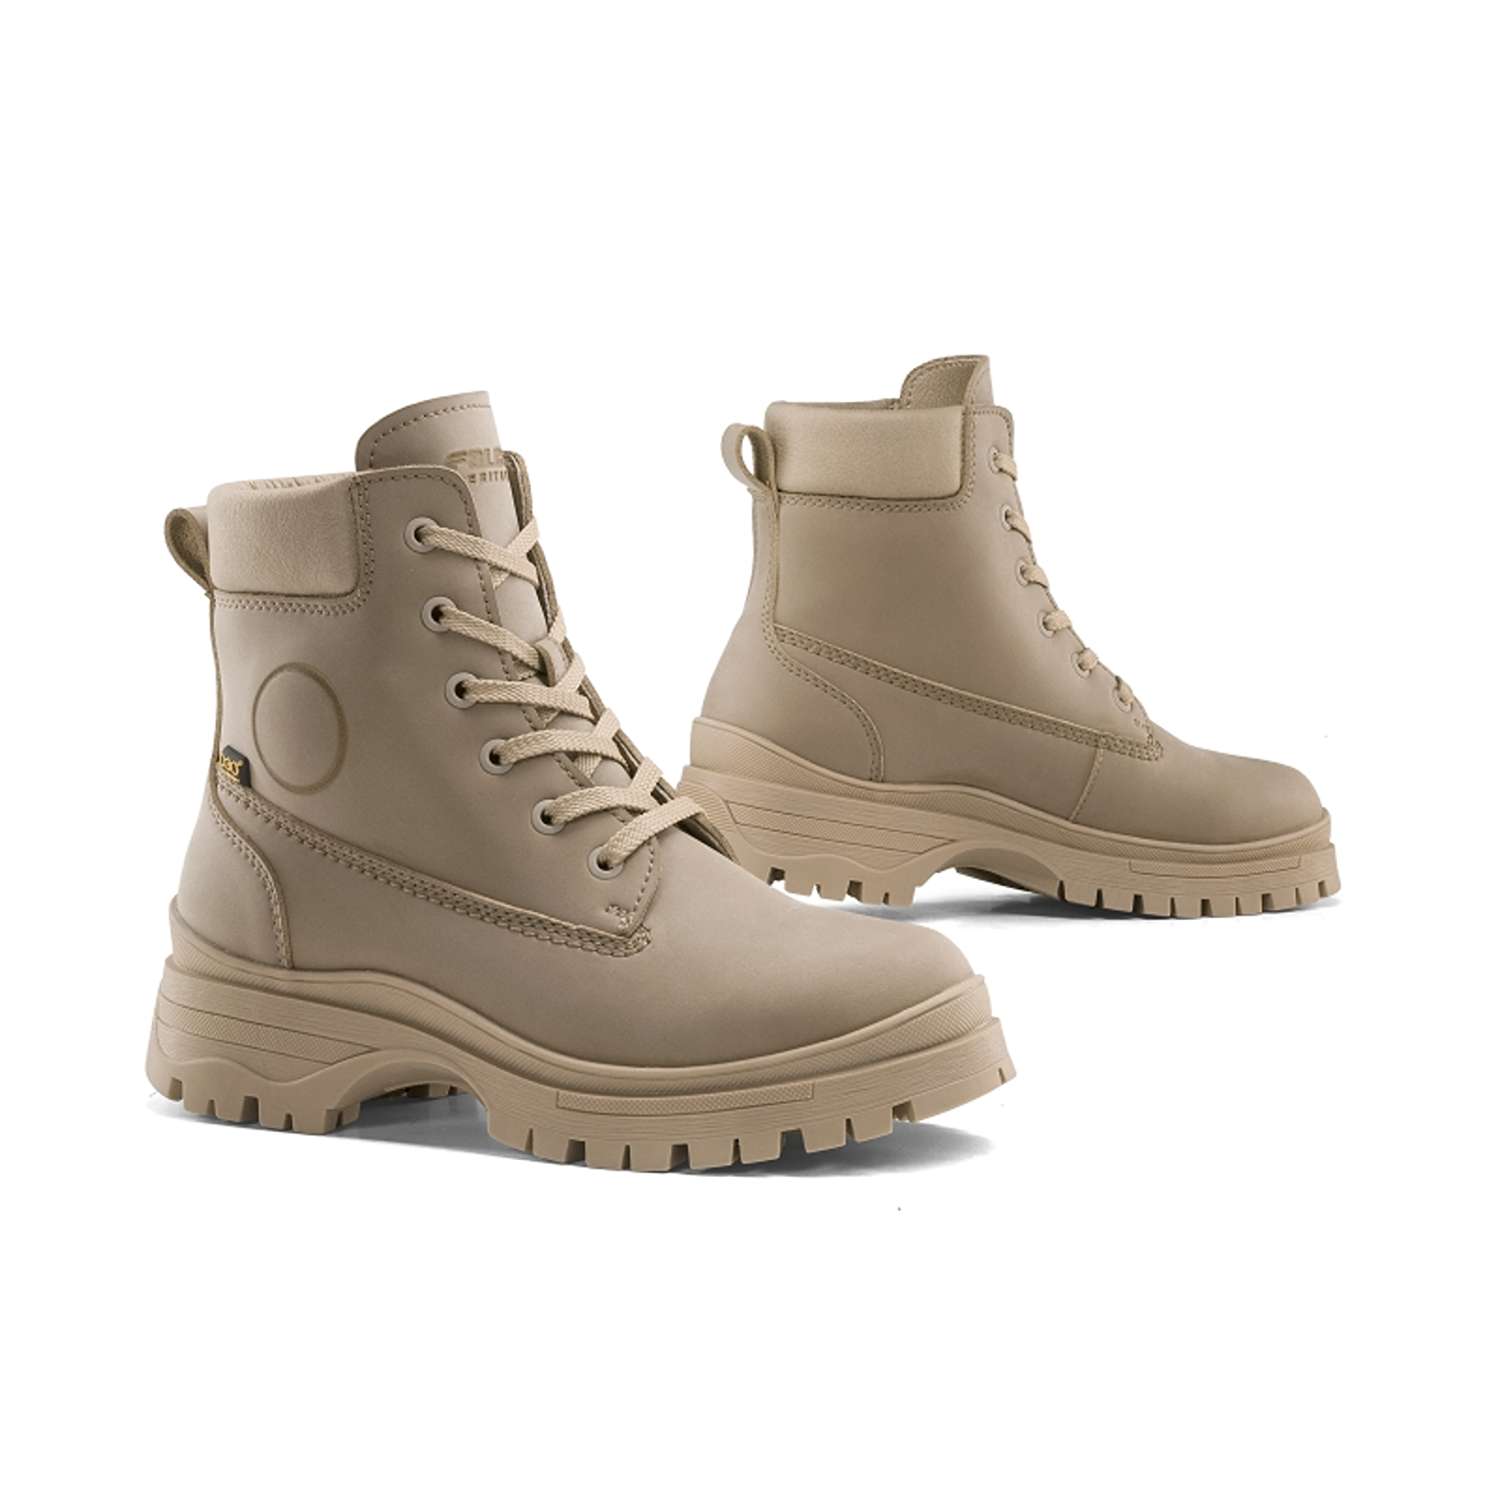 Image of Falco Zarah Boots Beige Brown Size 41 ID 8052675496666